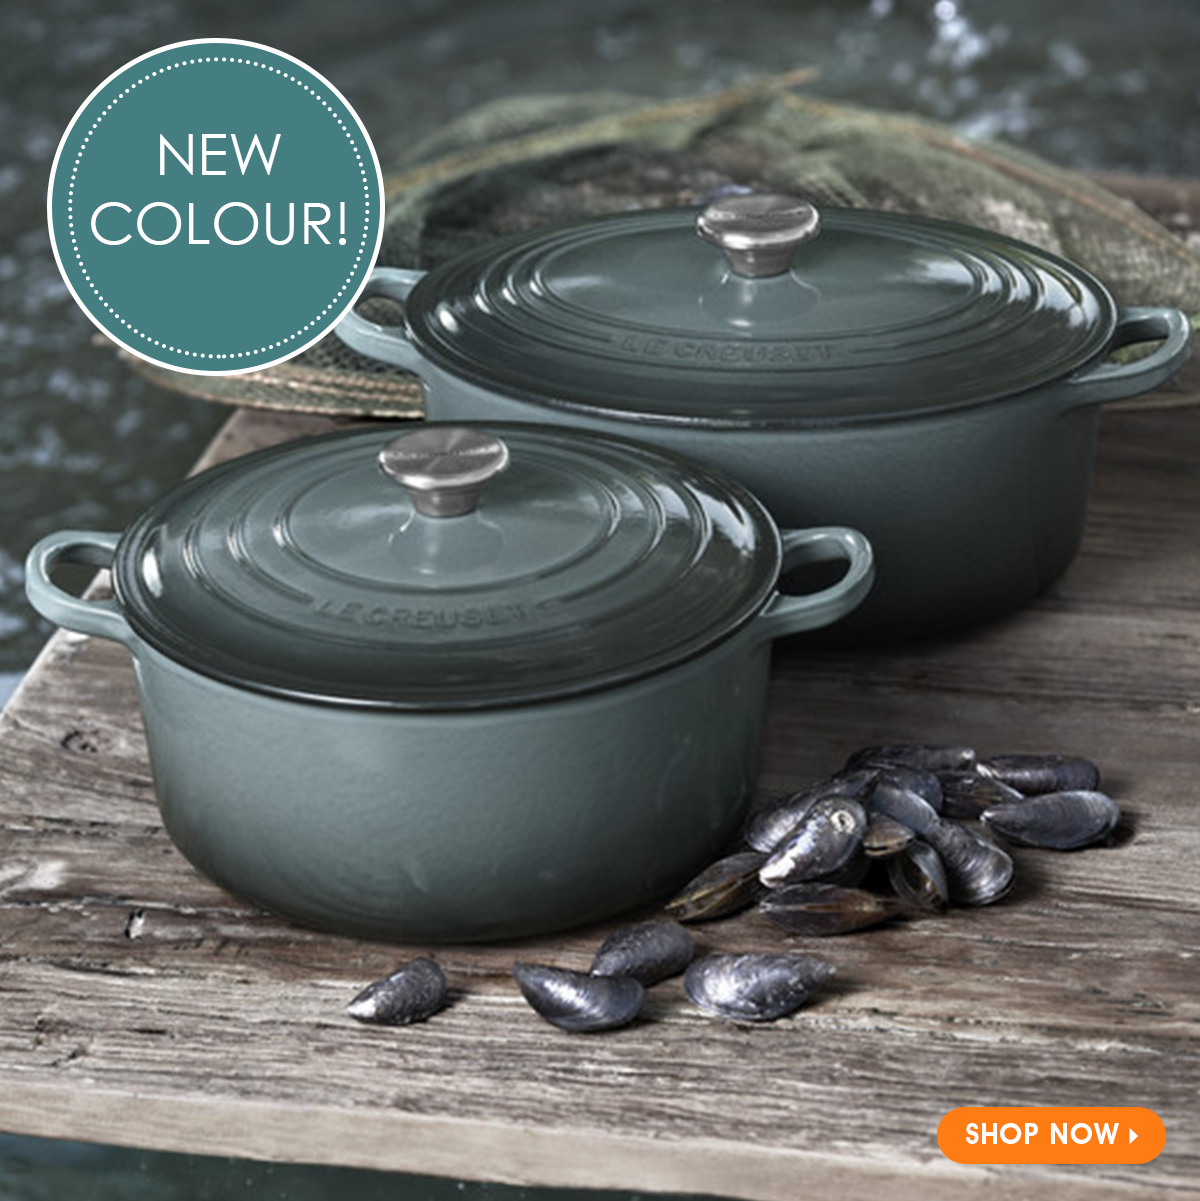 Le Creuset From Ocean to Table Delicious Fish Dishes